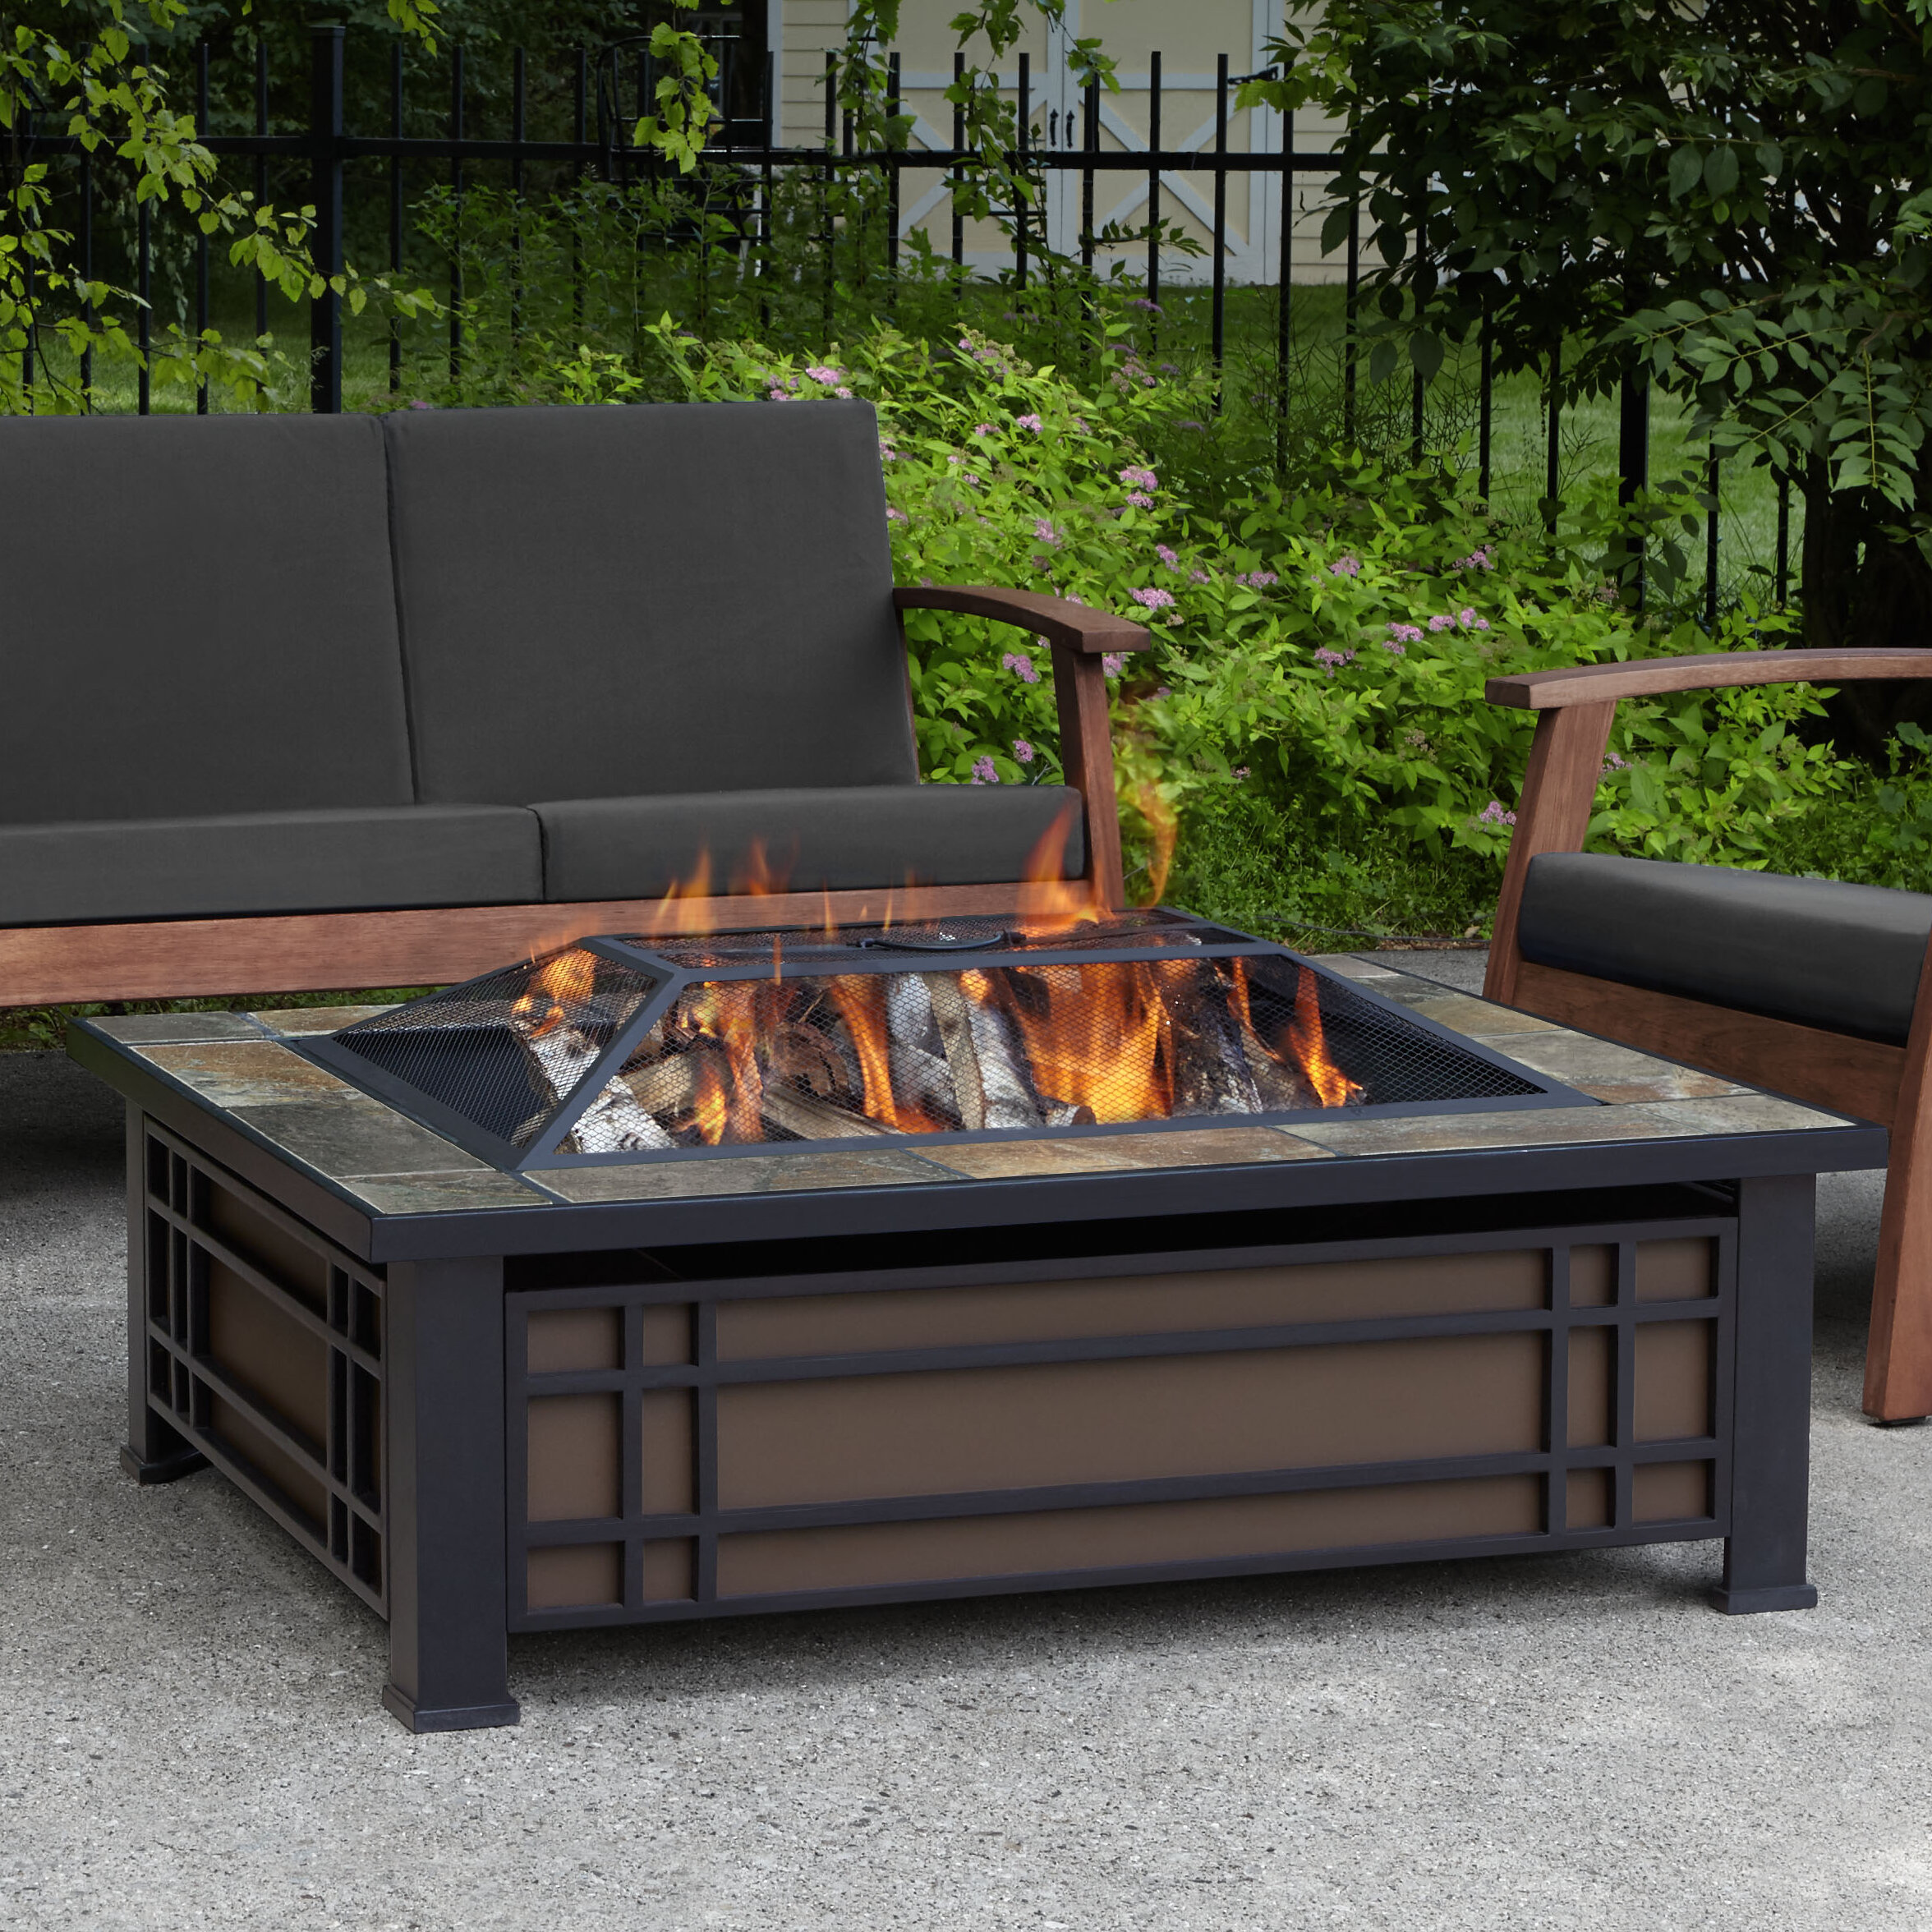 Real Flame Hamilton Steel Wood Burning Fire Pit Table Reviews Wayfair